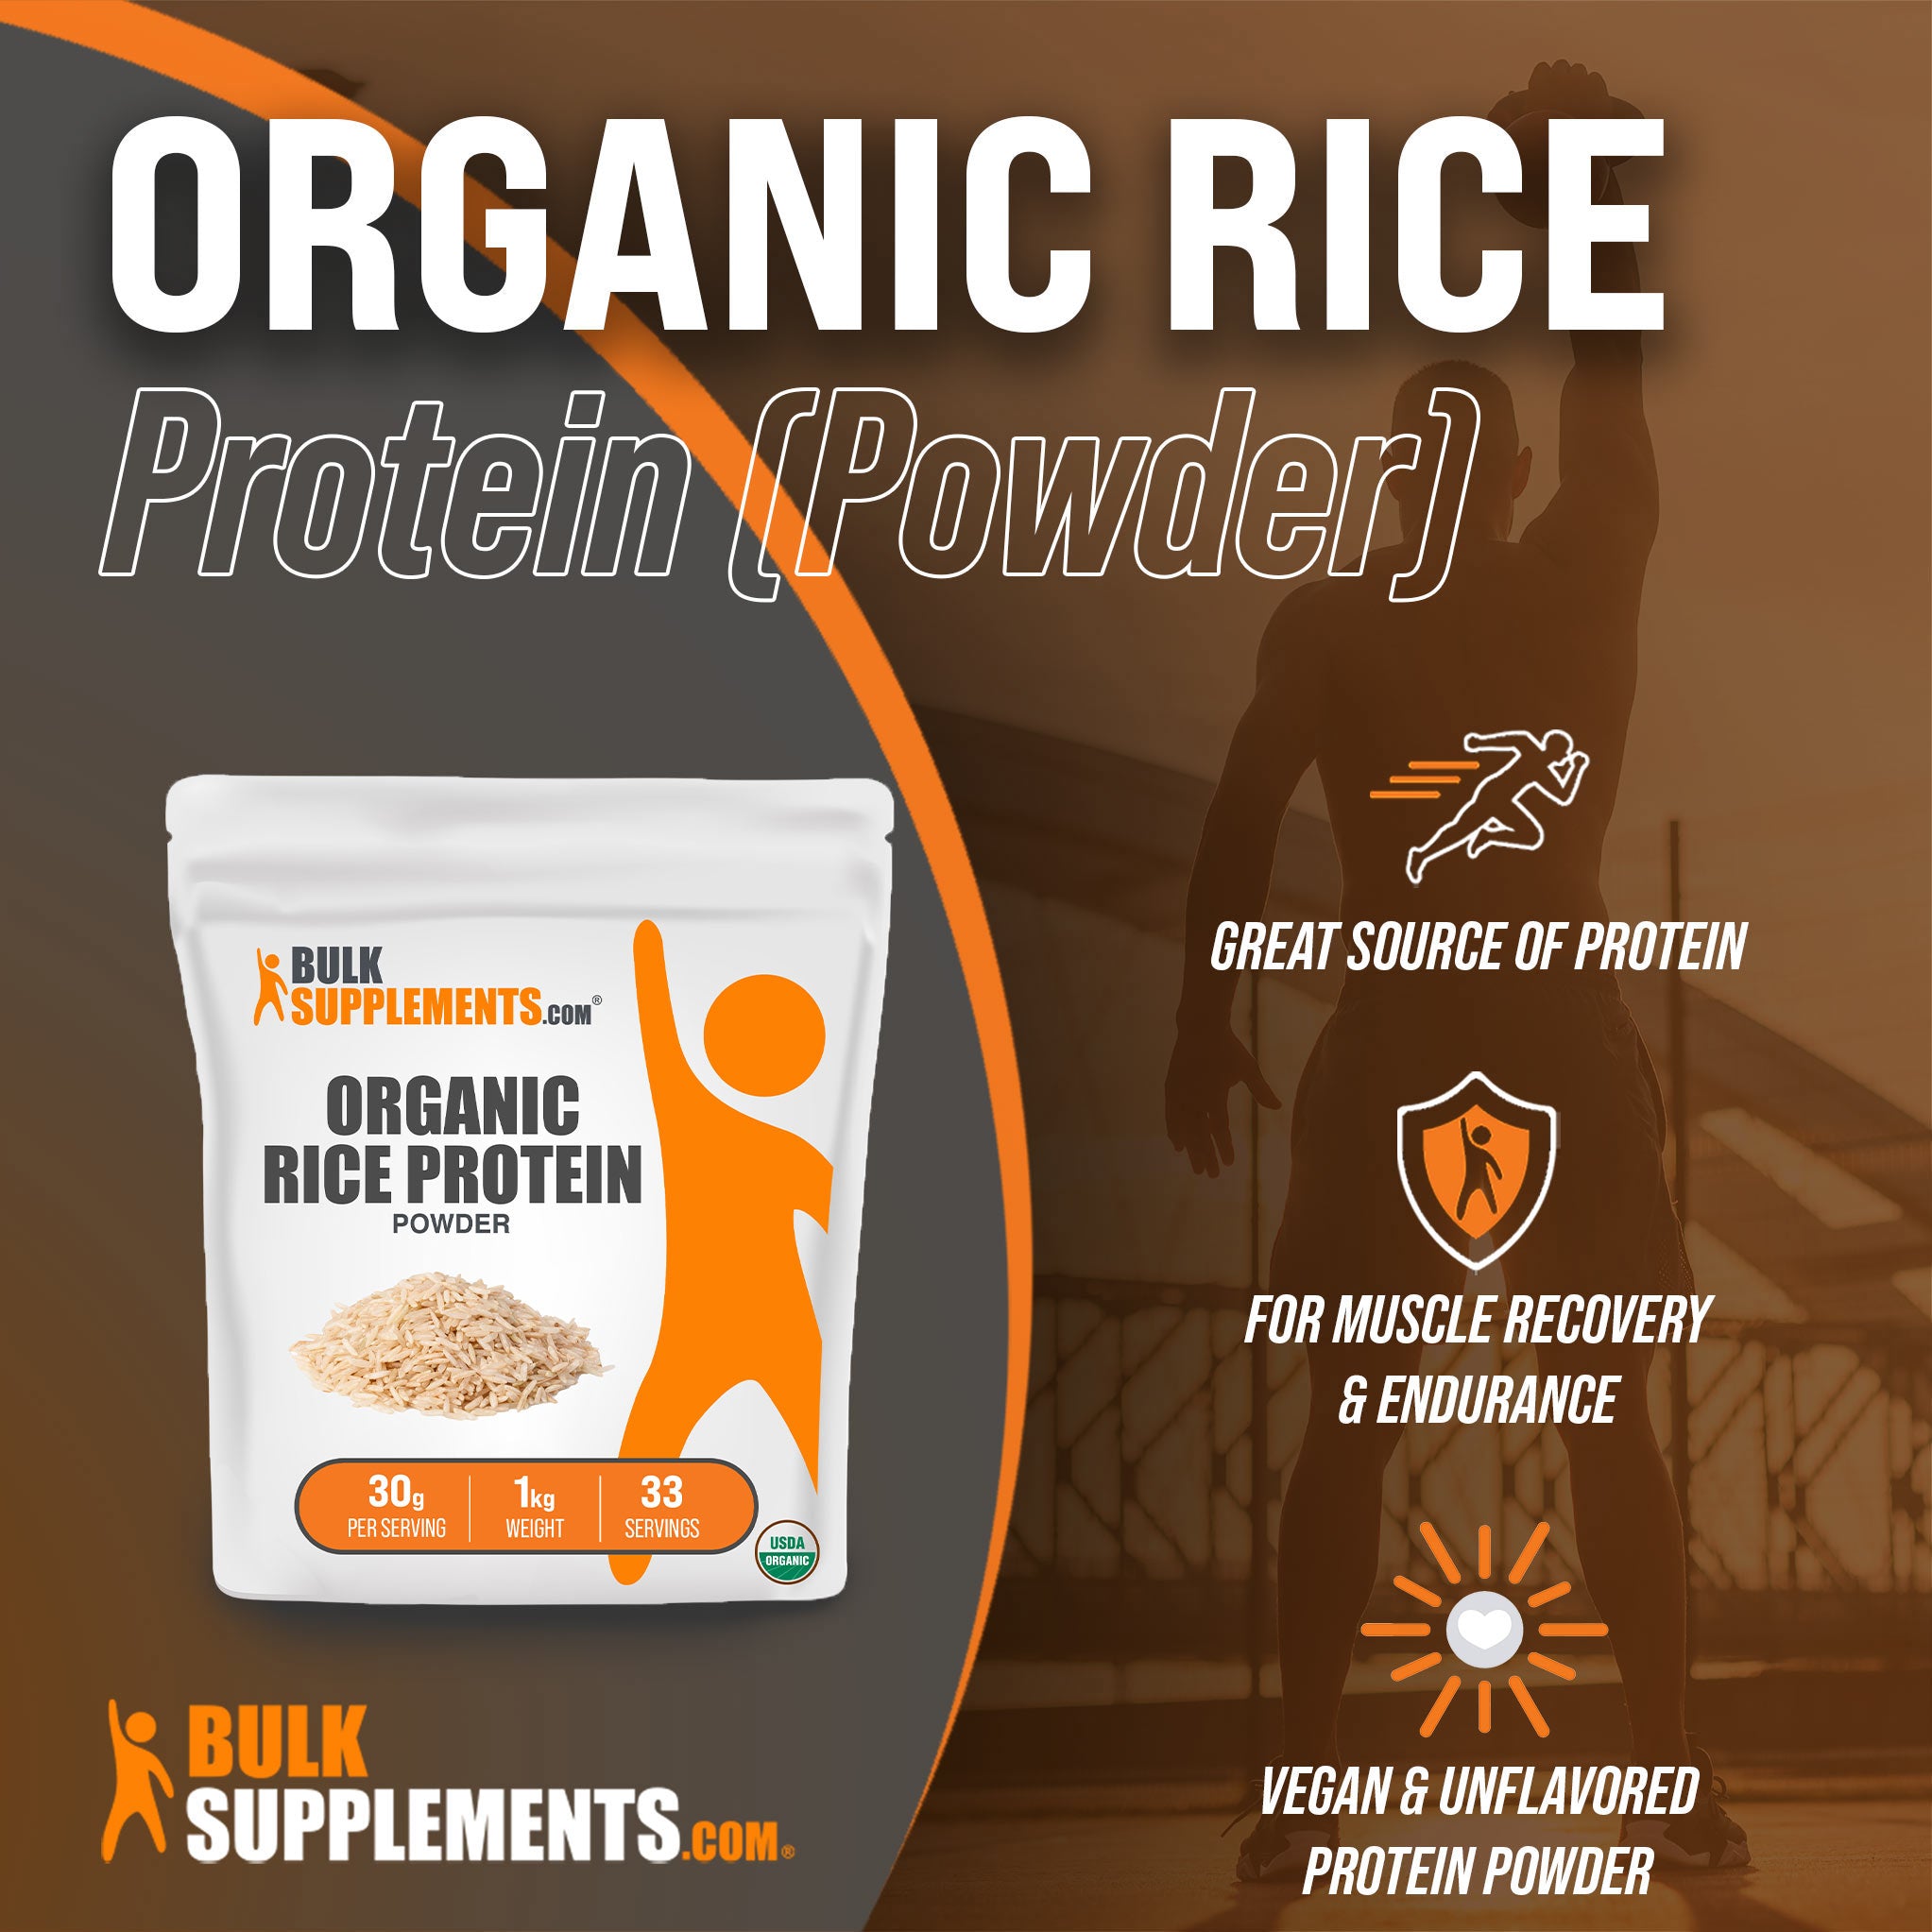 Benefits of Organic Rice Protein Powder: great source of protein, for muscle recovery and endurance, vegan and unflavored protein powder